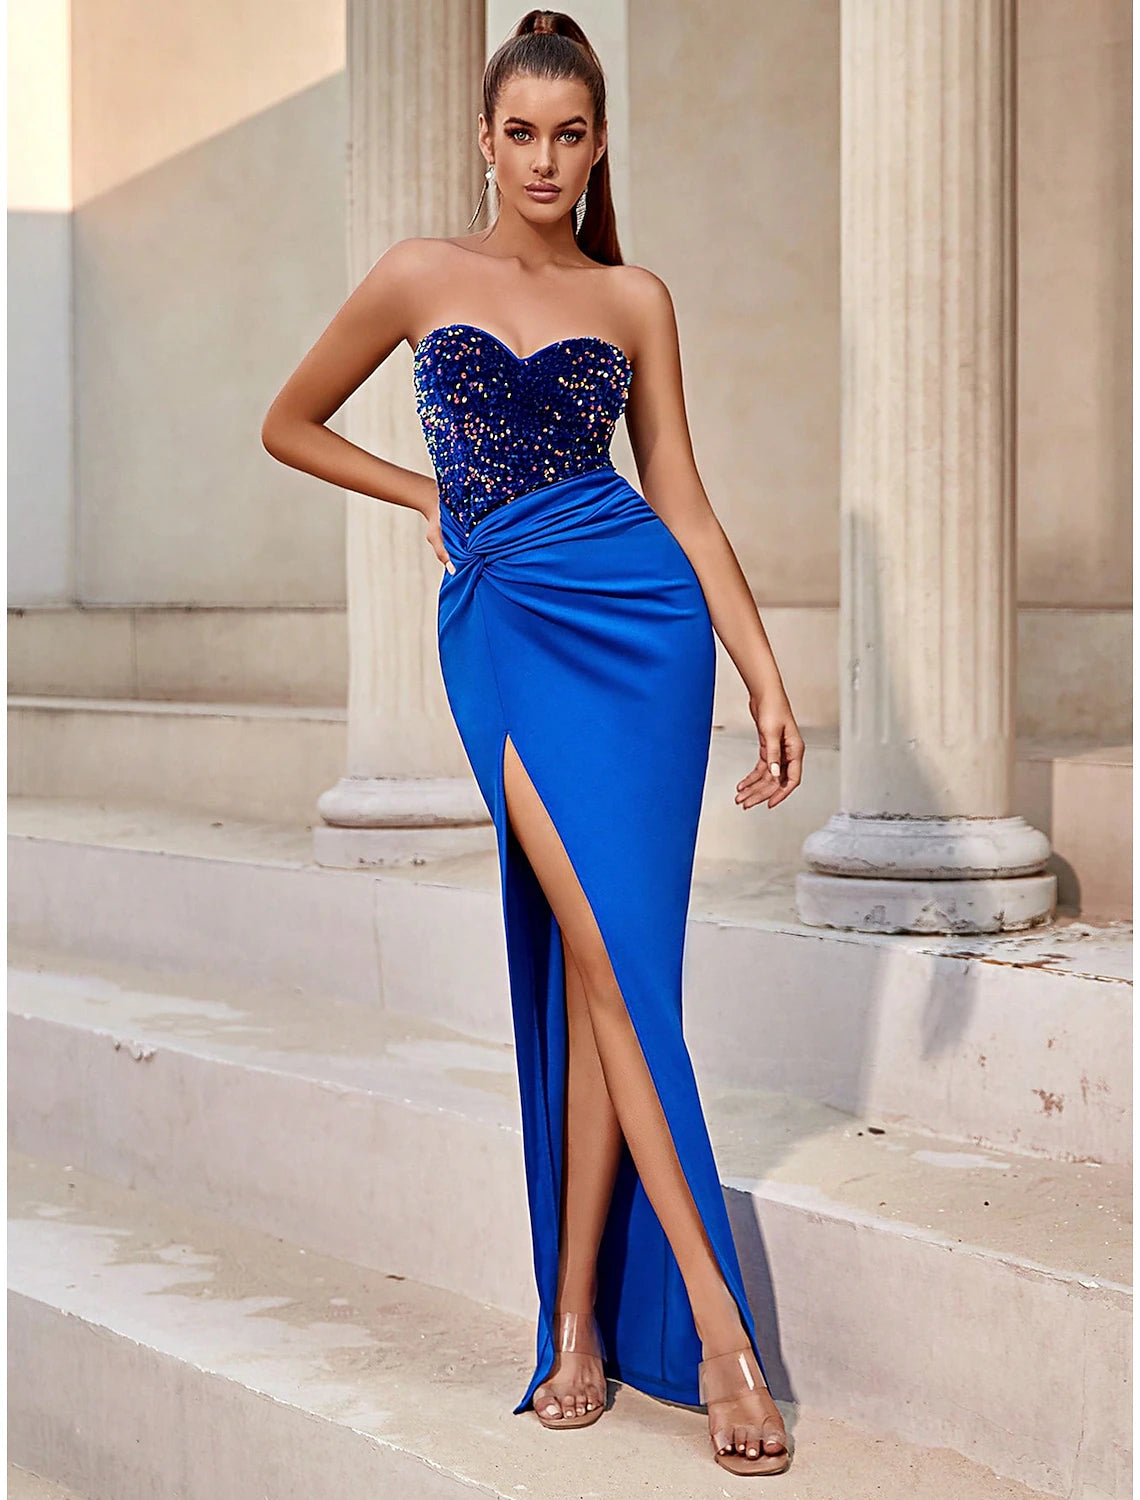 Blue Orange Green Blue A-Line Evening Gown Sparkle & Shine Dress Formal Floor Length Sleeveless Sweetheart Stretch Fabric with Glitter Sequin Slit Fall Wedding